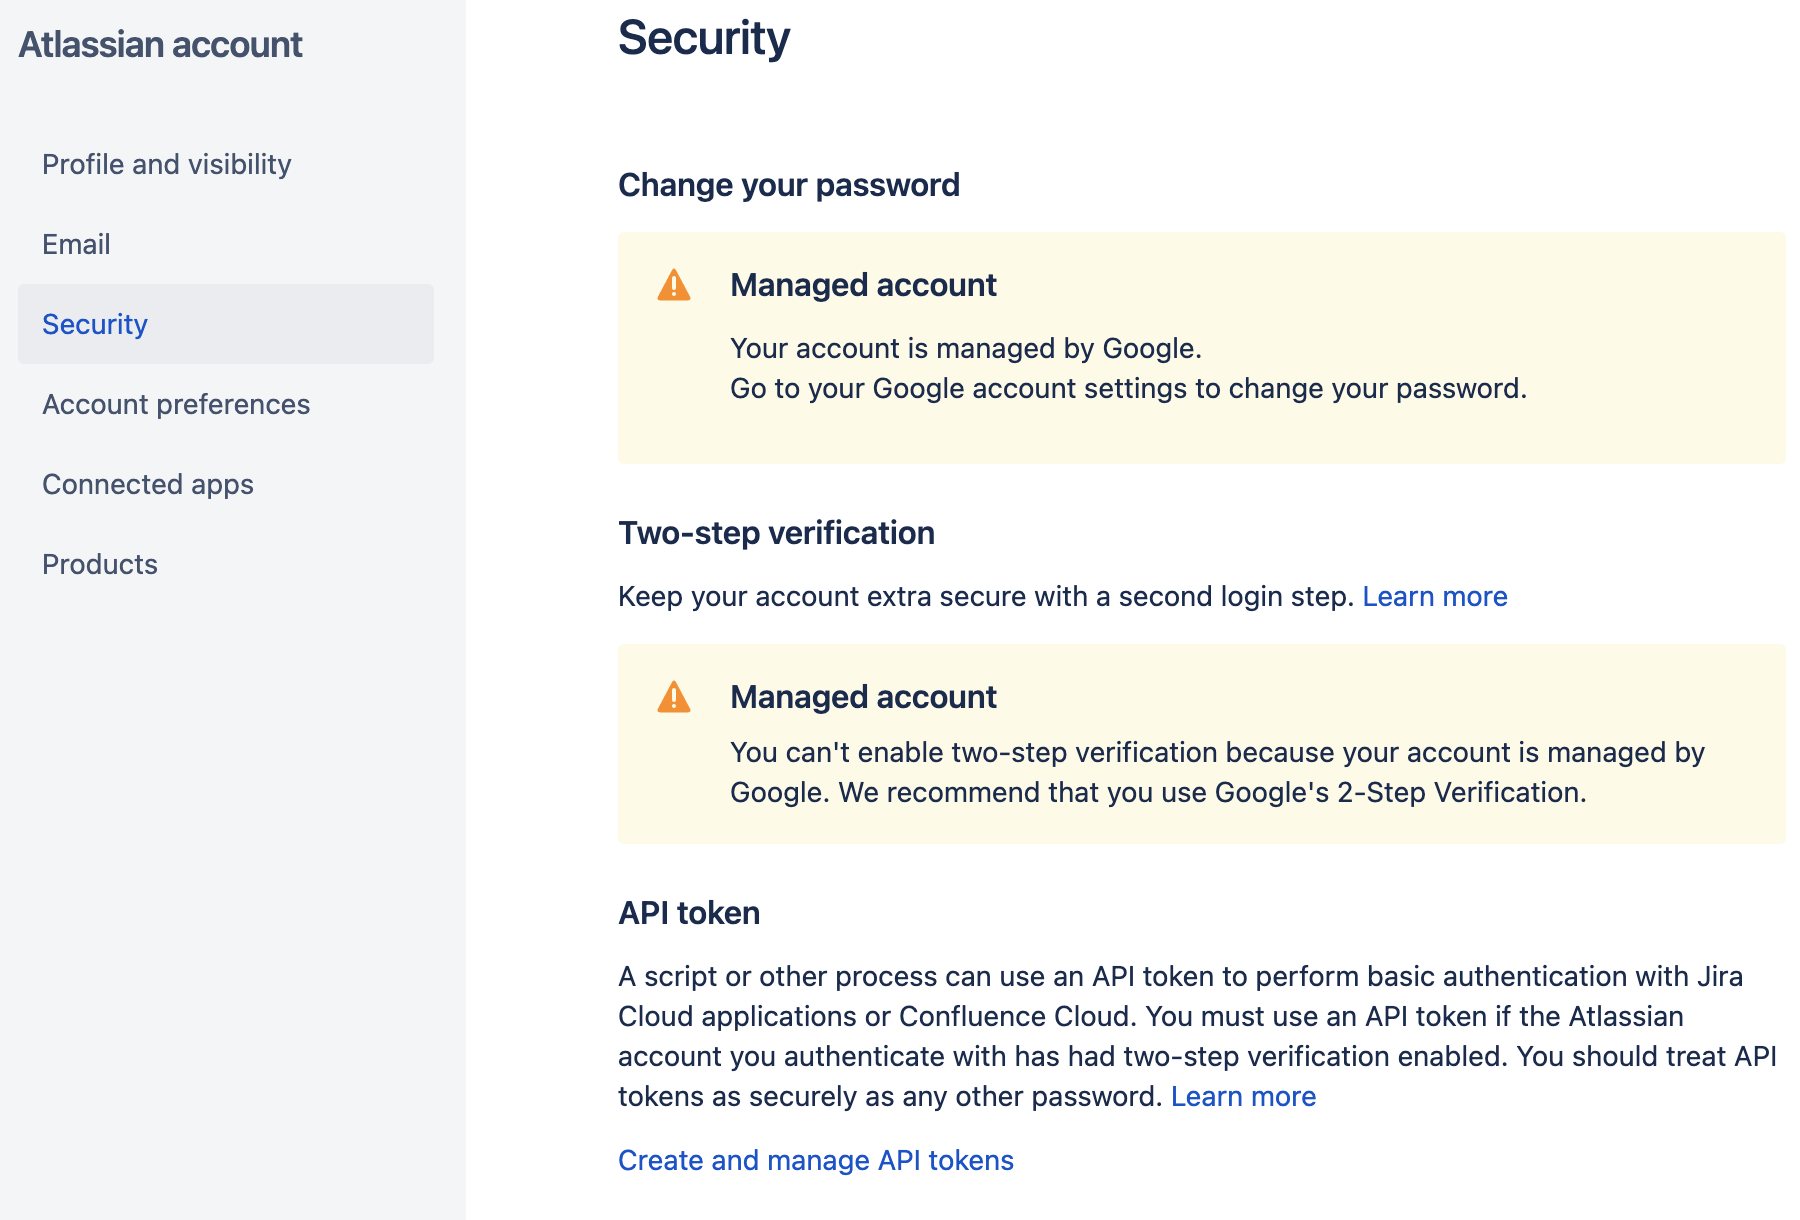 account security